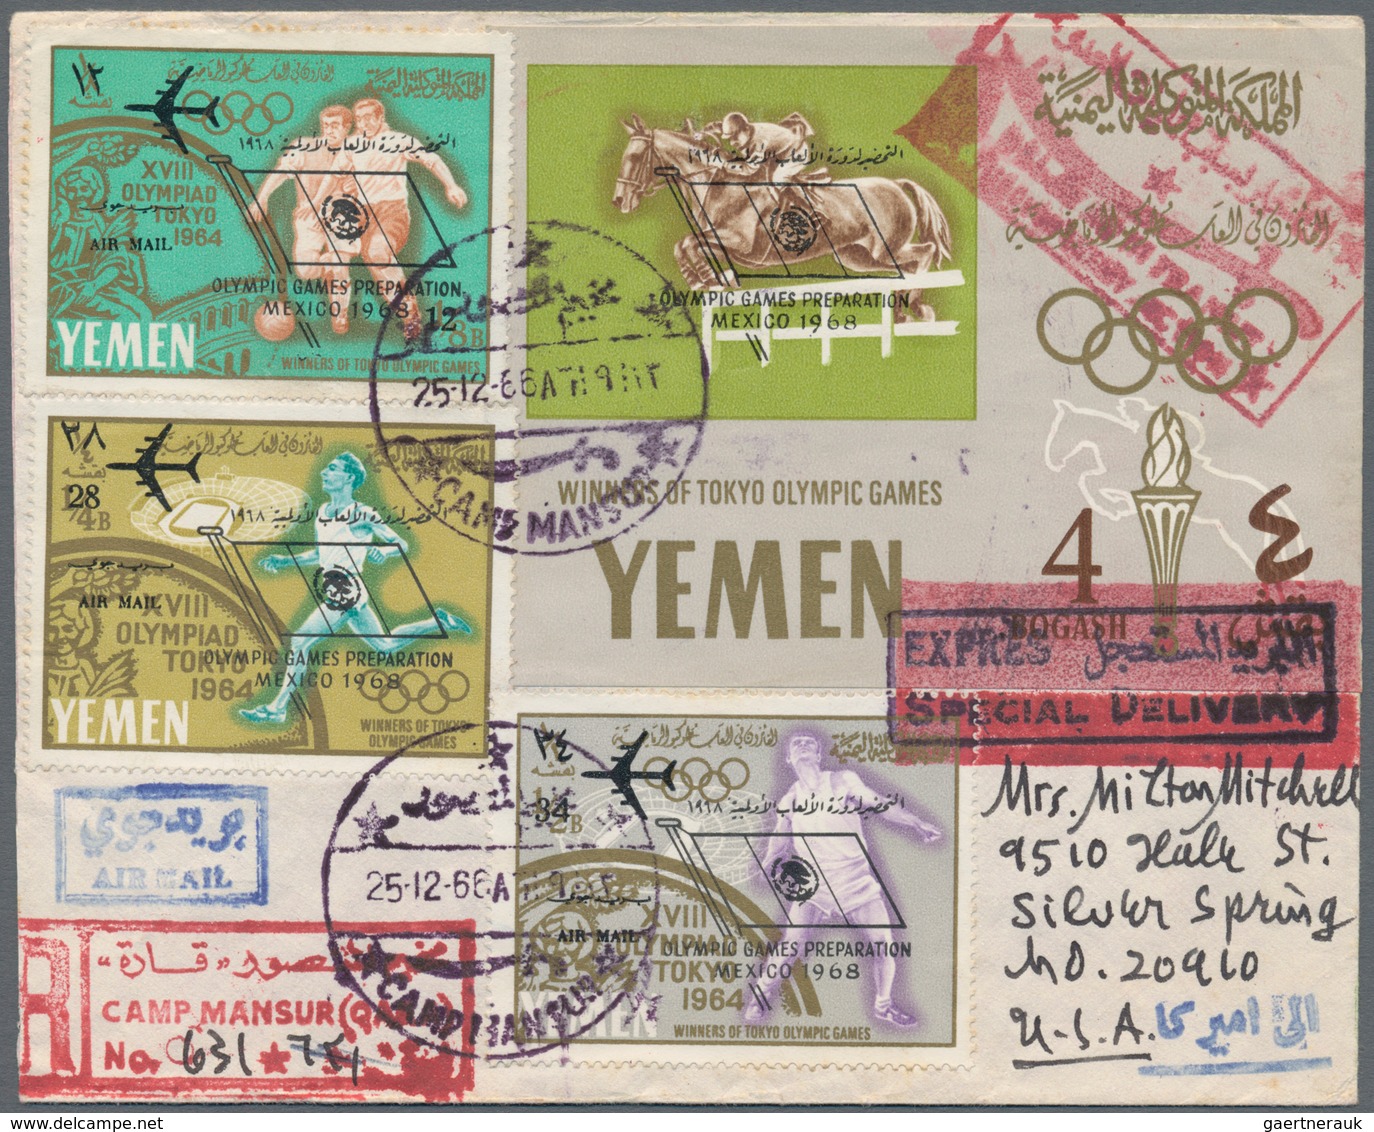 Naher Osten: 1965/1974, Gulf states, box with loose MNH material of various states incl. multiples,